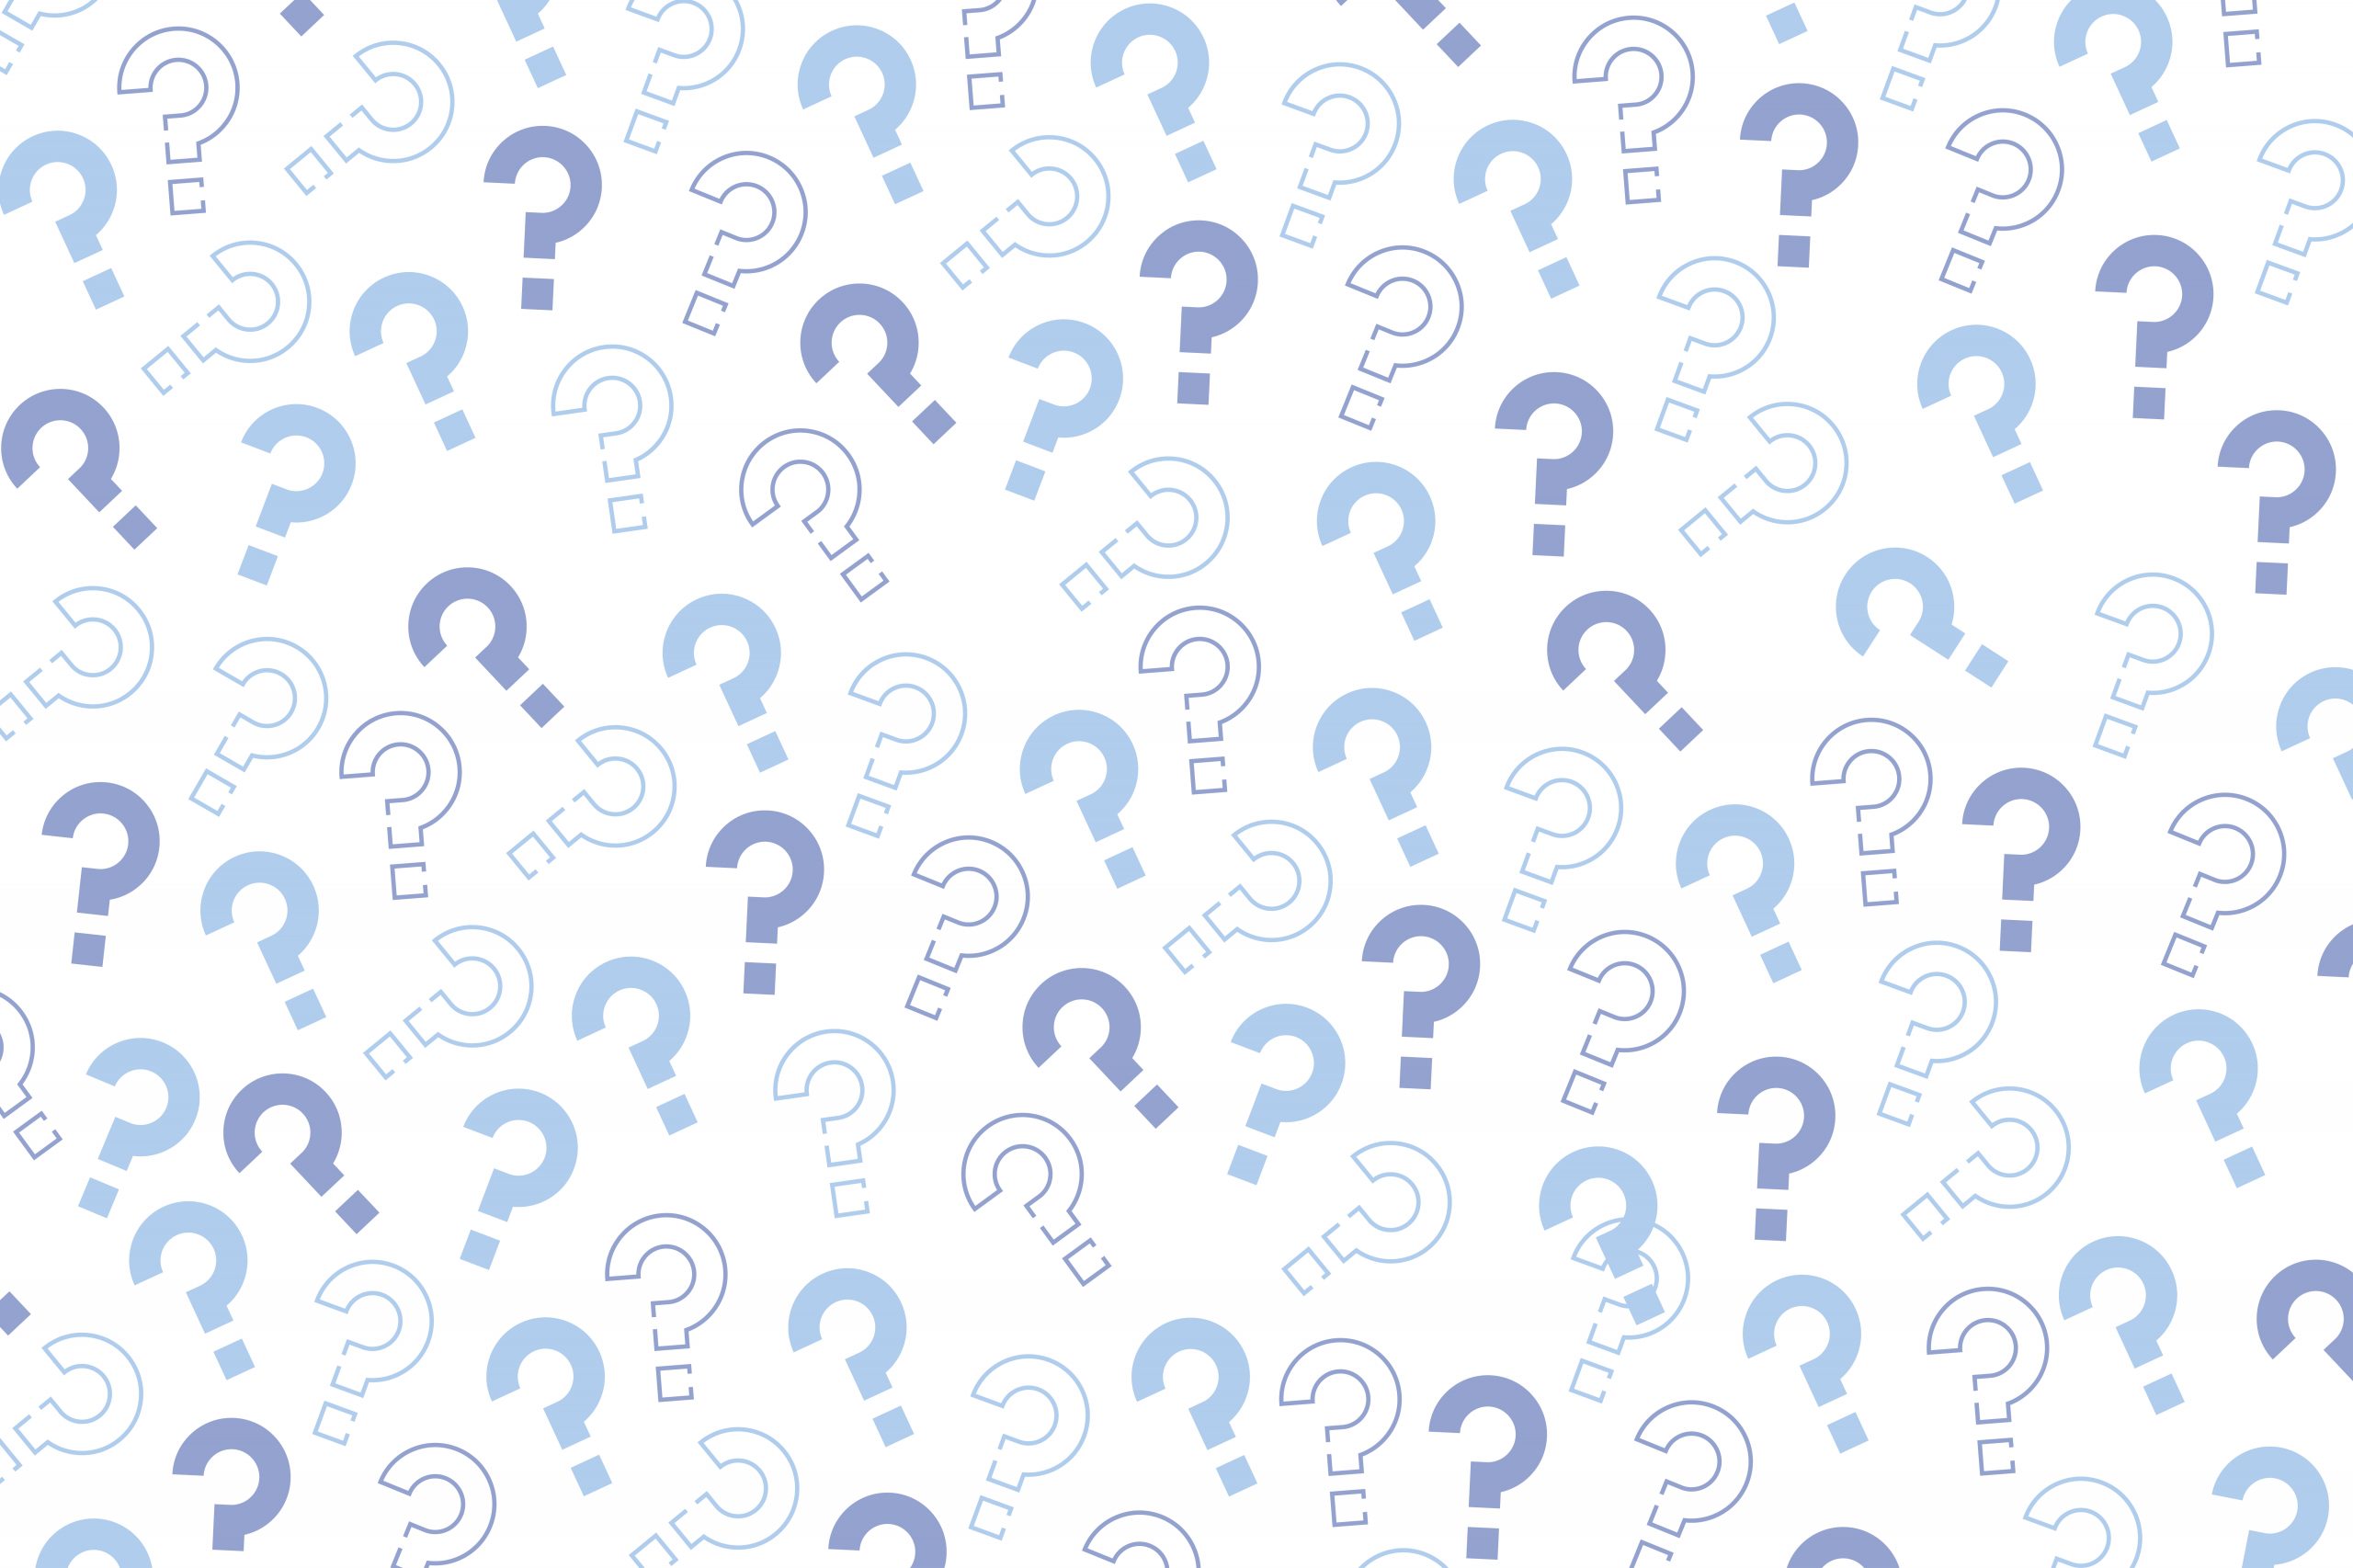 question_marks_background